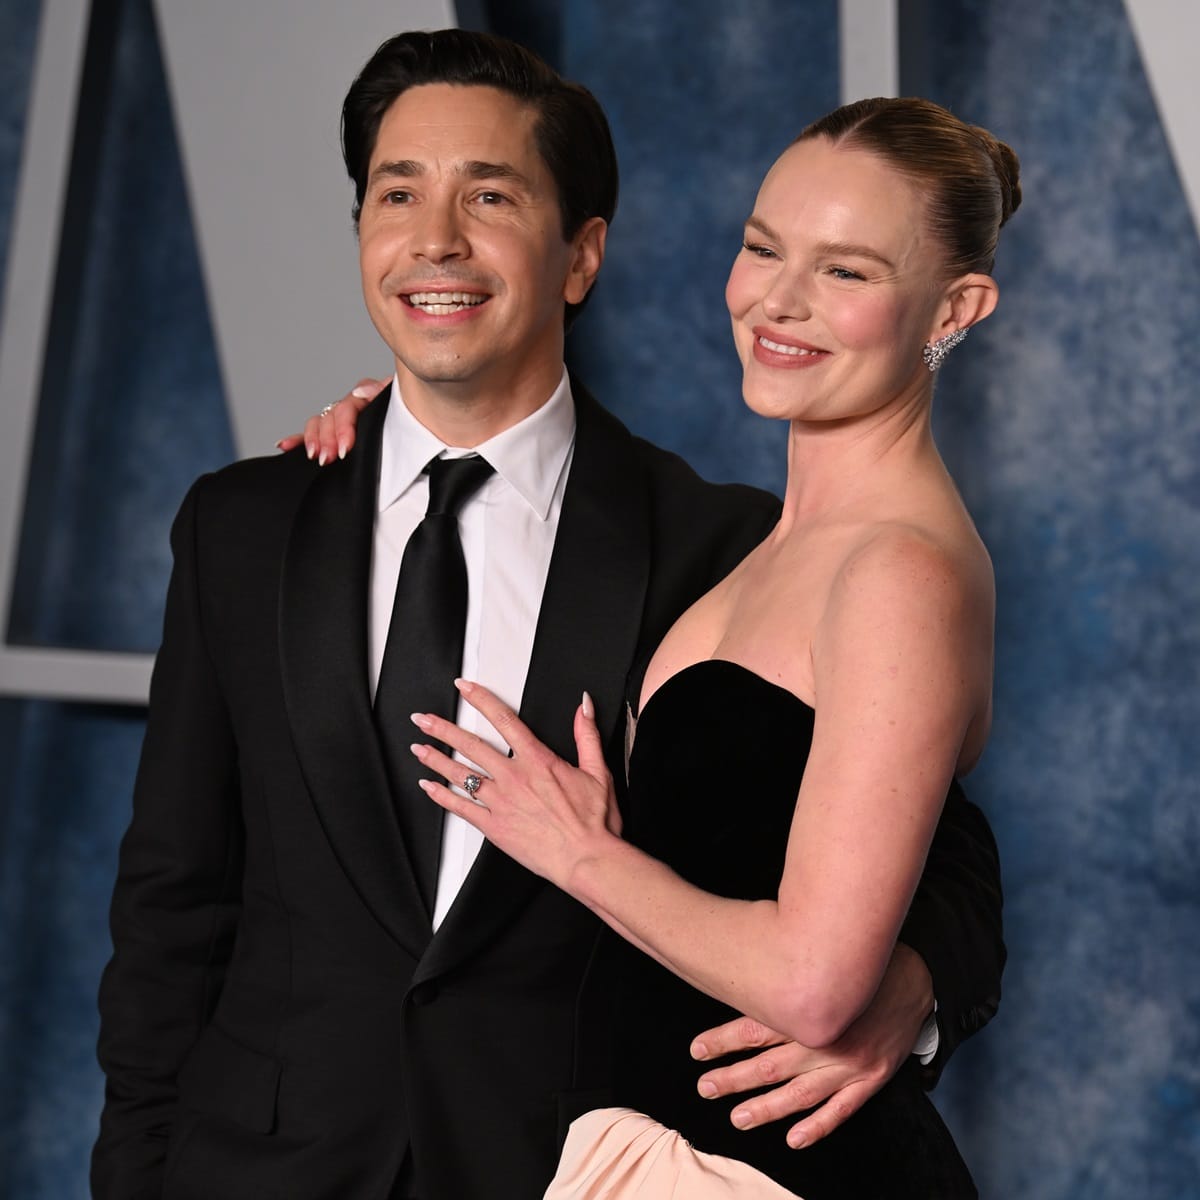 Justin Long and Kate Bosworth confirmed their engagement on Long’s Life Is Short podcast after showing off Bosworth’s stunning engagement ring at the 2023 Vanity Fair Oscar Party